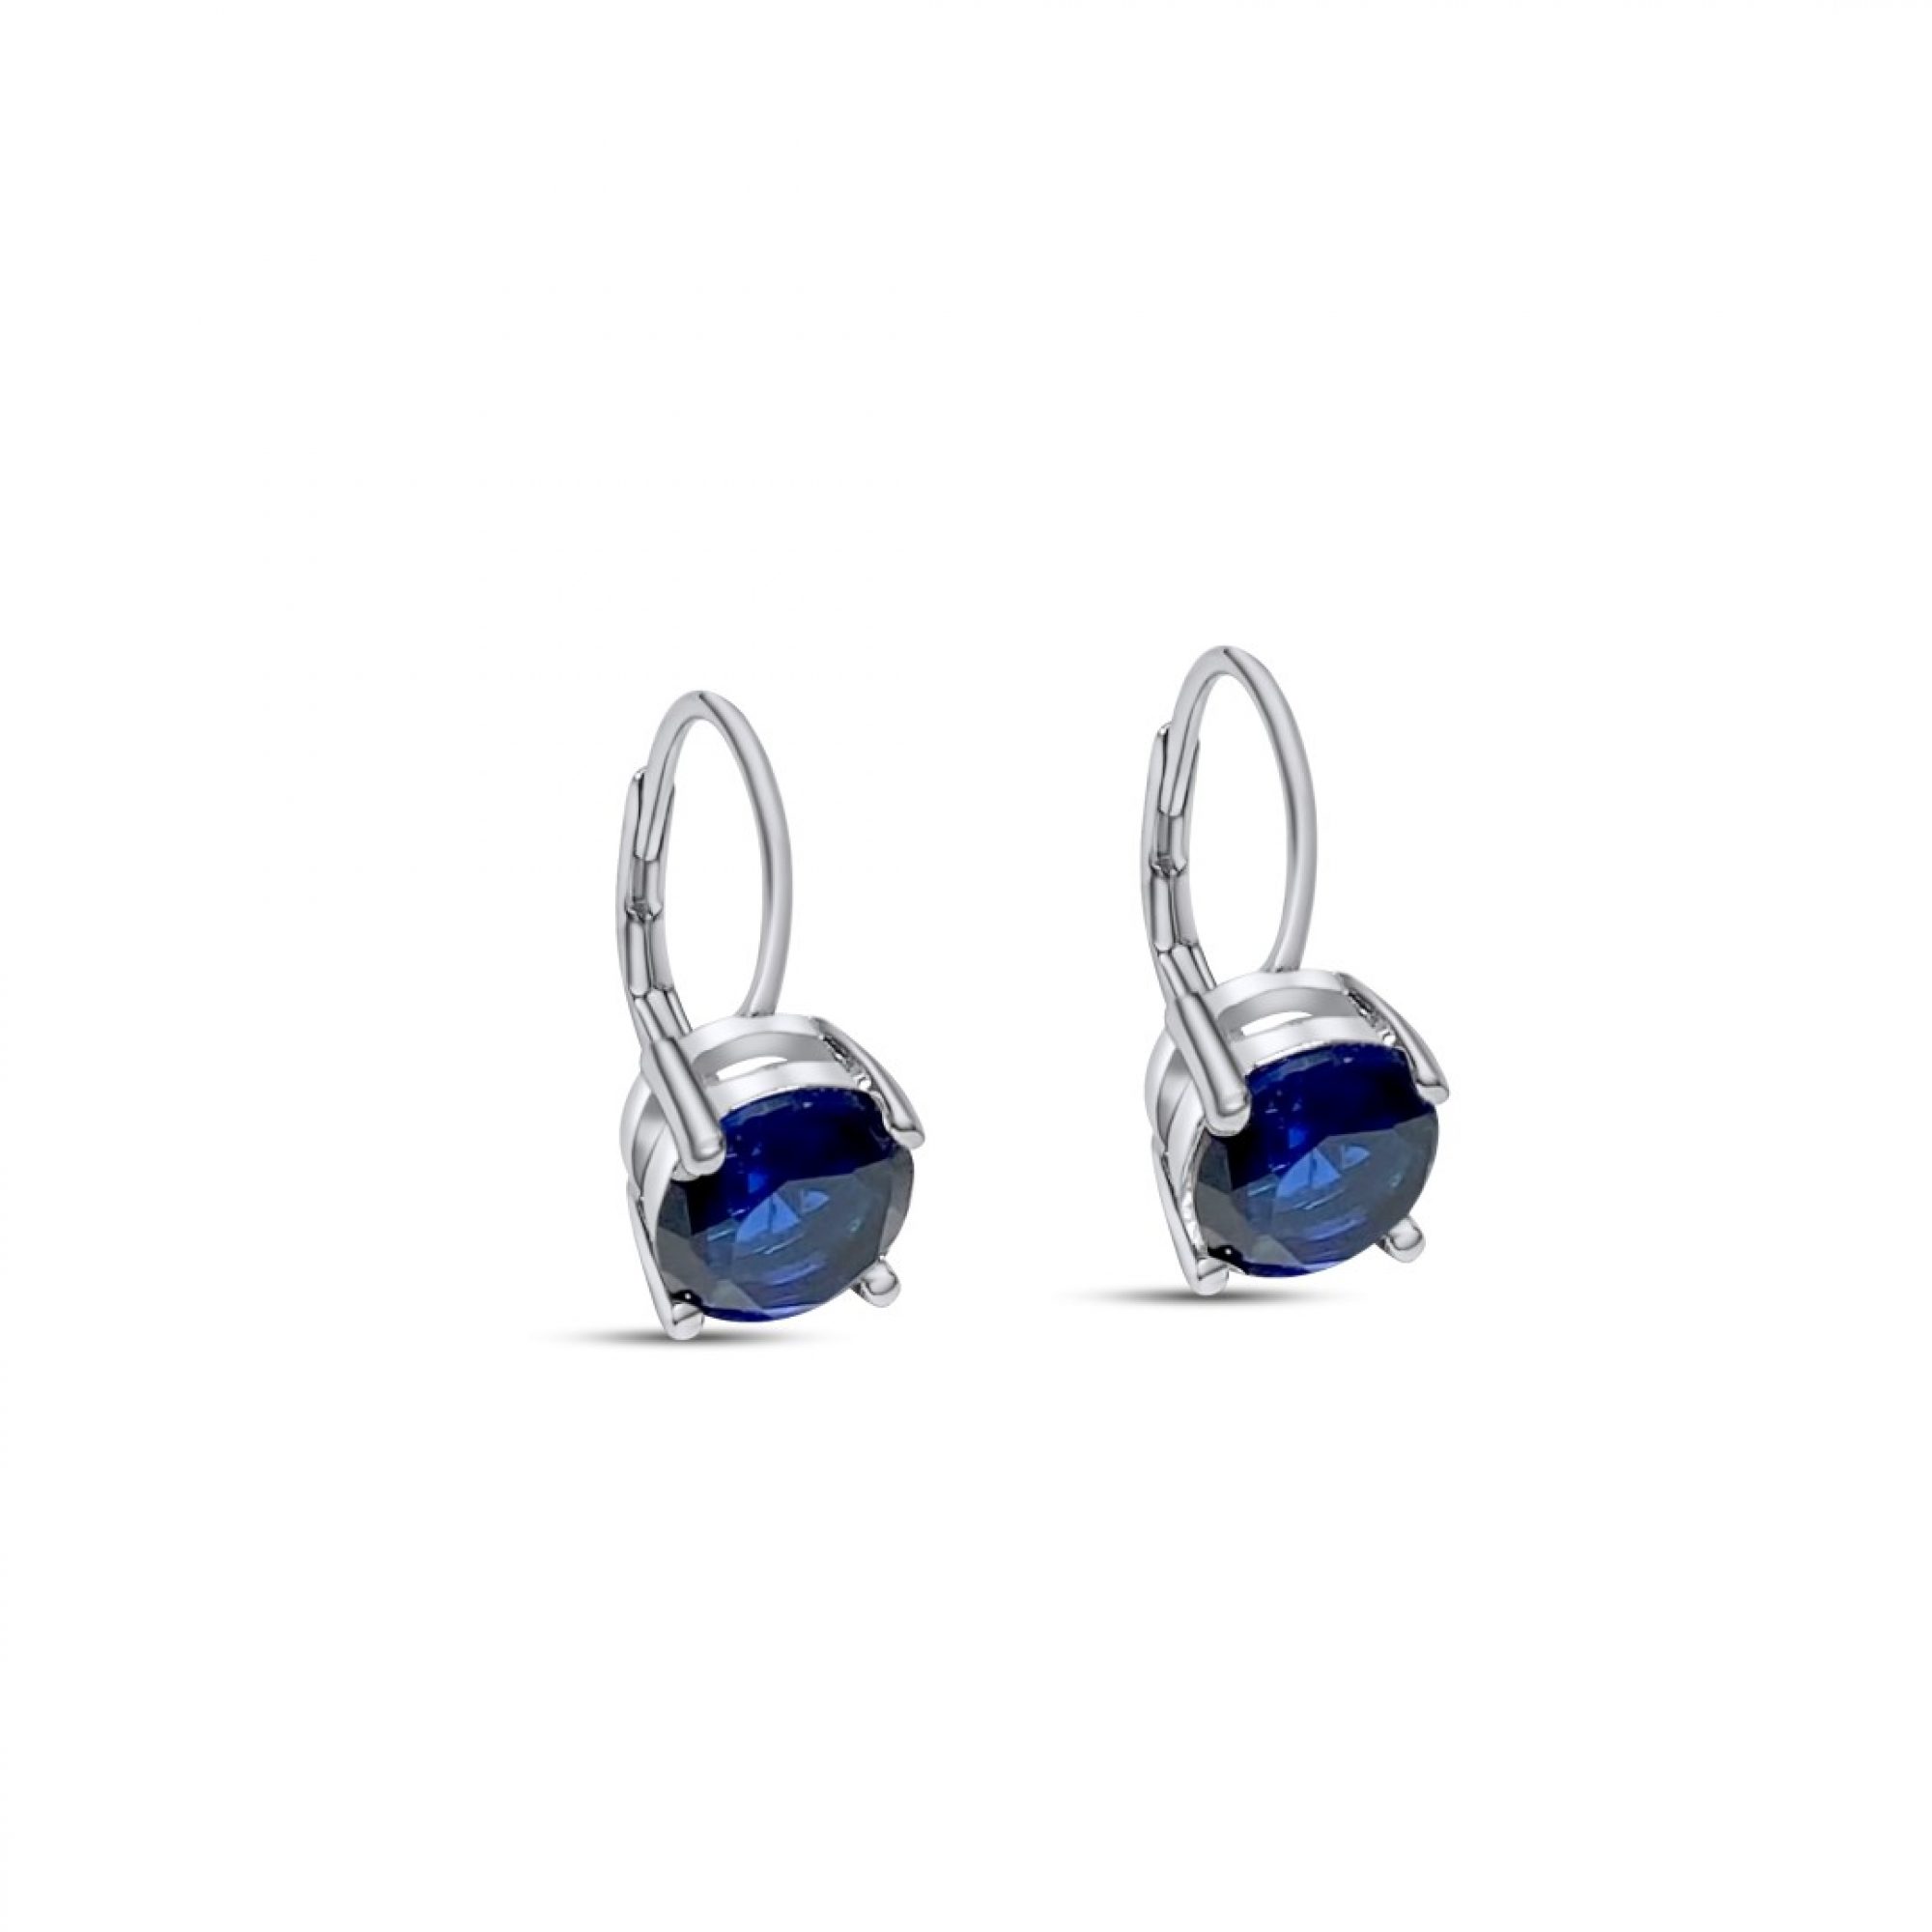 Silver earrings with sapphire stone